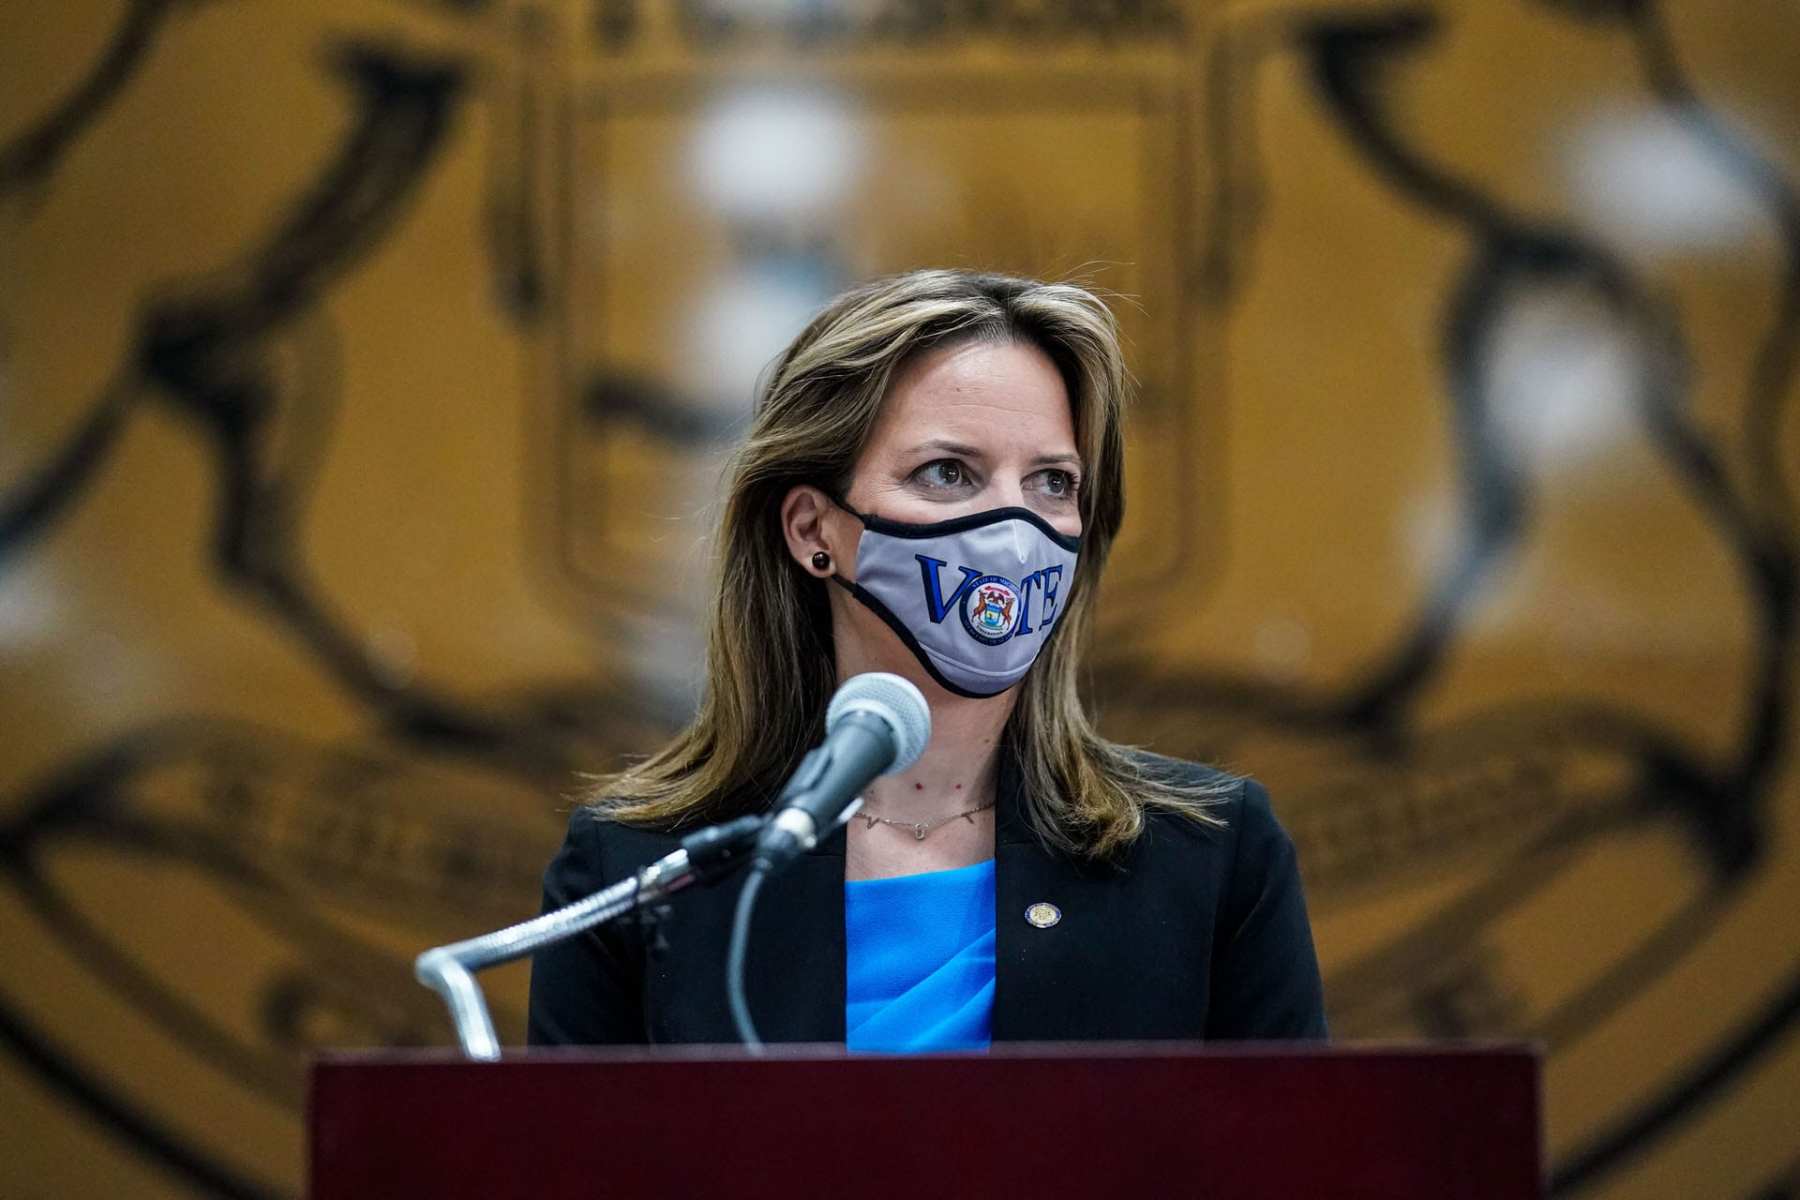 Michigan Secretary of State Jocelyn Benson stands at a podium with a mask on that says "vote."